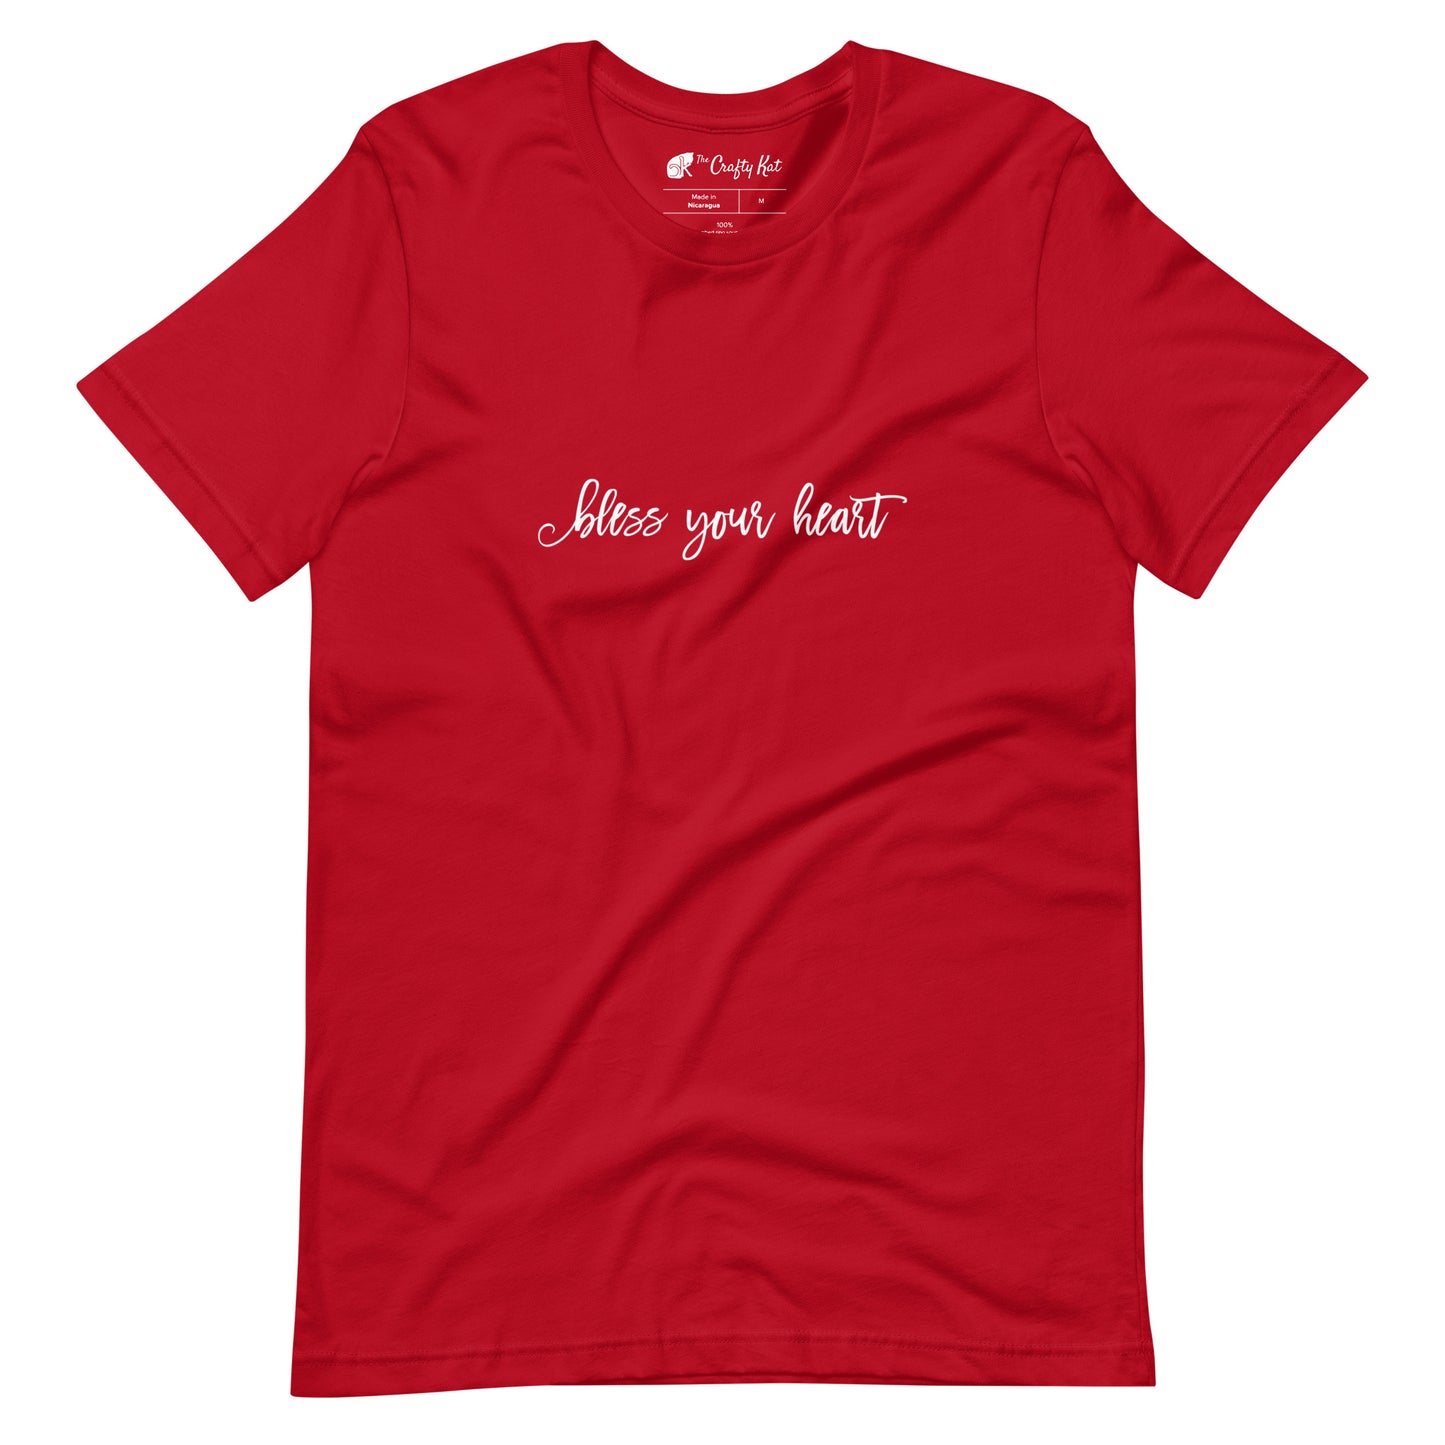 Red t-shirt with white graphic in an excessively twee font: "bless your heart"